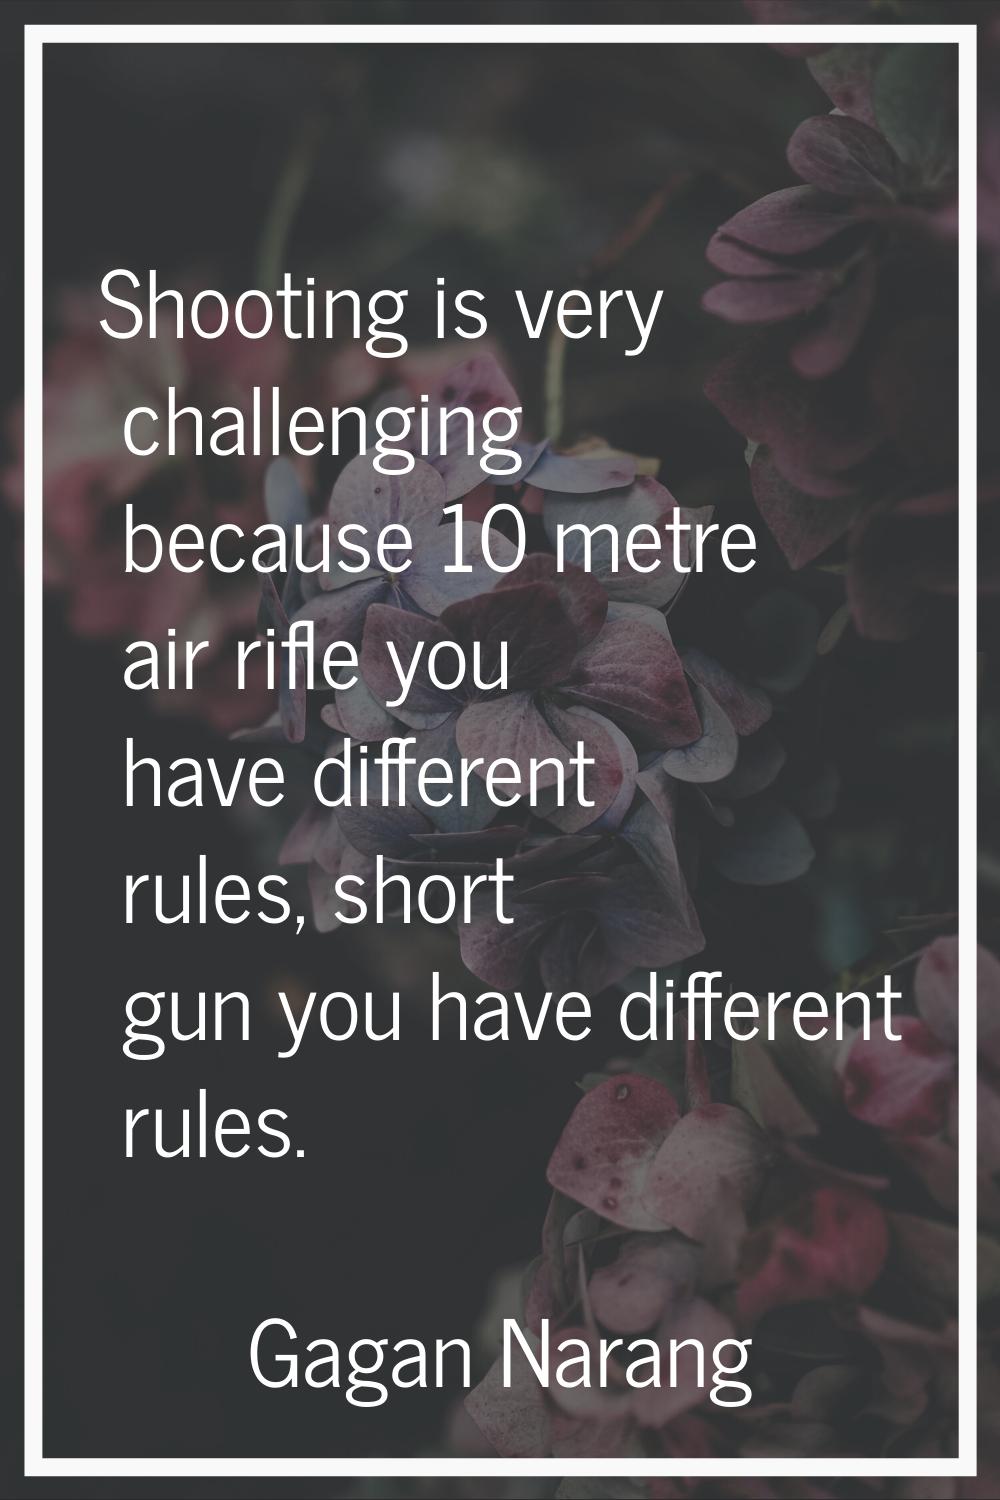 Shooting is very challenging because 10 metre air rifle you have different rules, short gun you hav